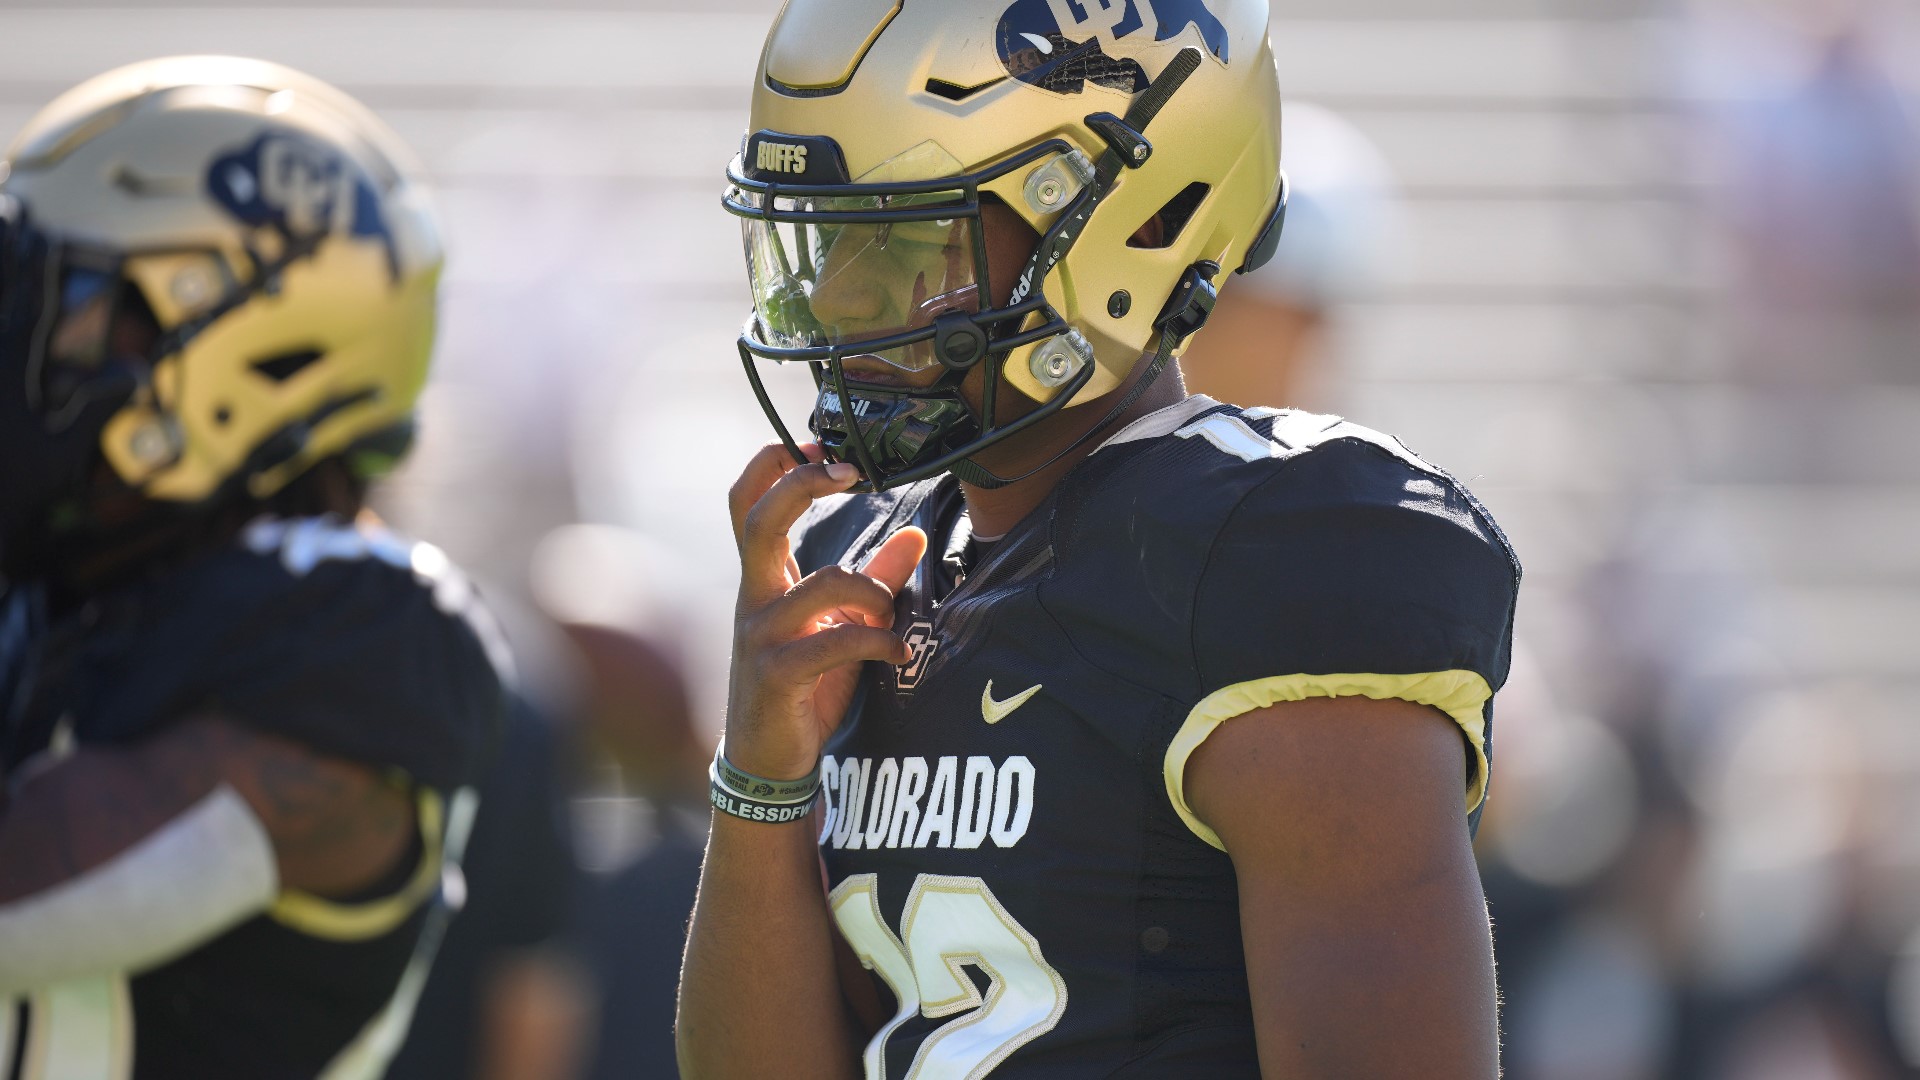 After a final game that included -19 rushing yards, four sacks, and 63 yards of total offense, the Colorado Buffaloes are ready to look forward toward Pac-12 play.